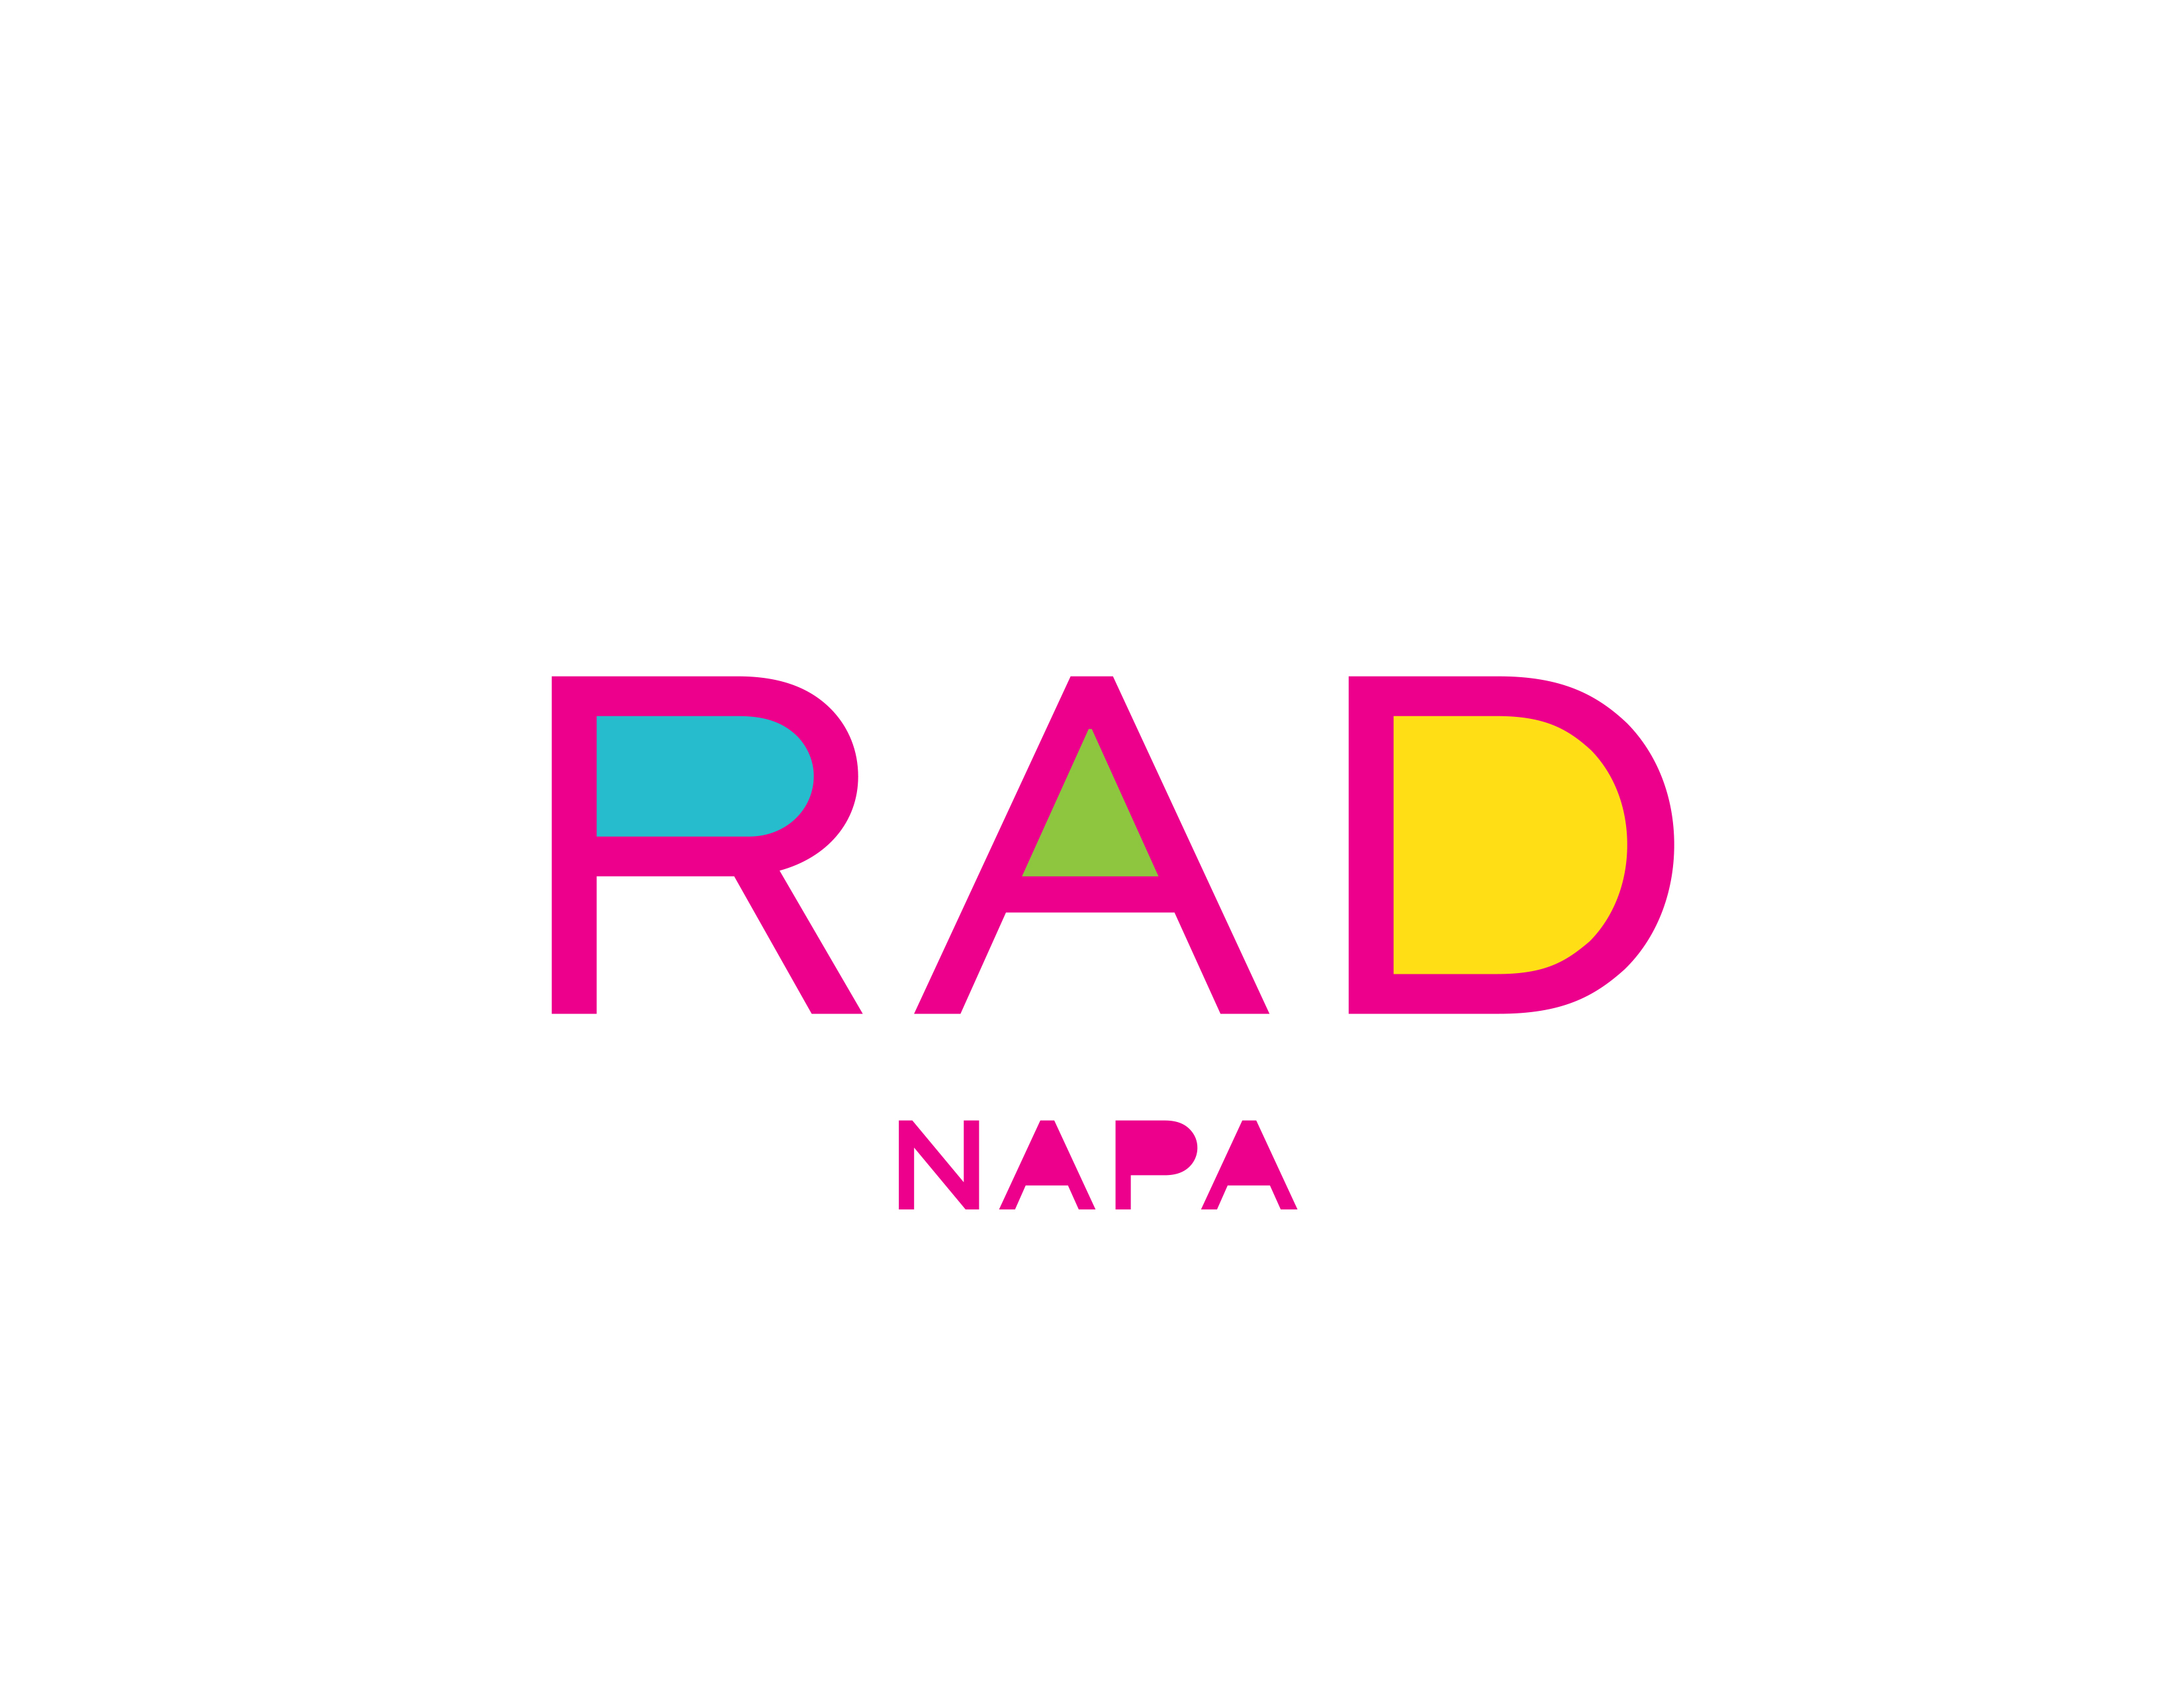 Established in 2016, The Rail Arts District (RAD) Napa enriches the community through investment in, and stewardship of, Napa’s only art district.